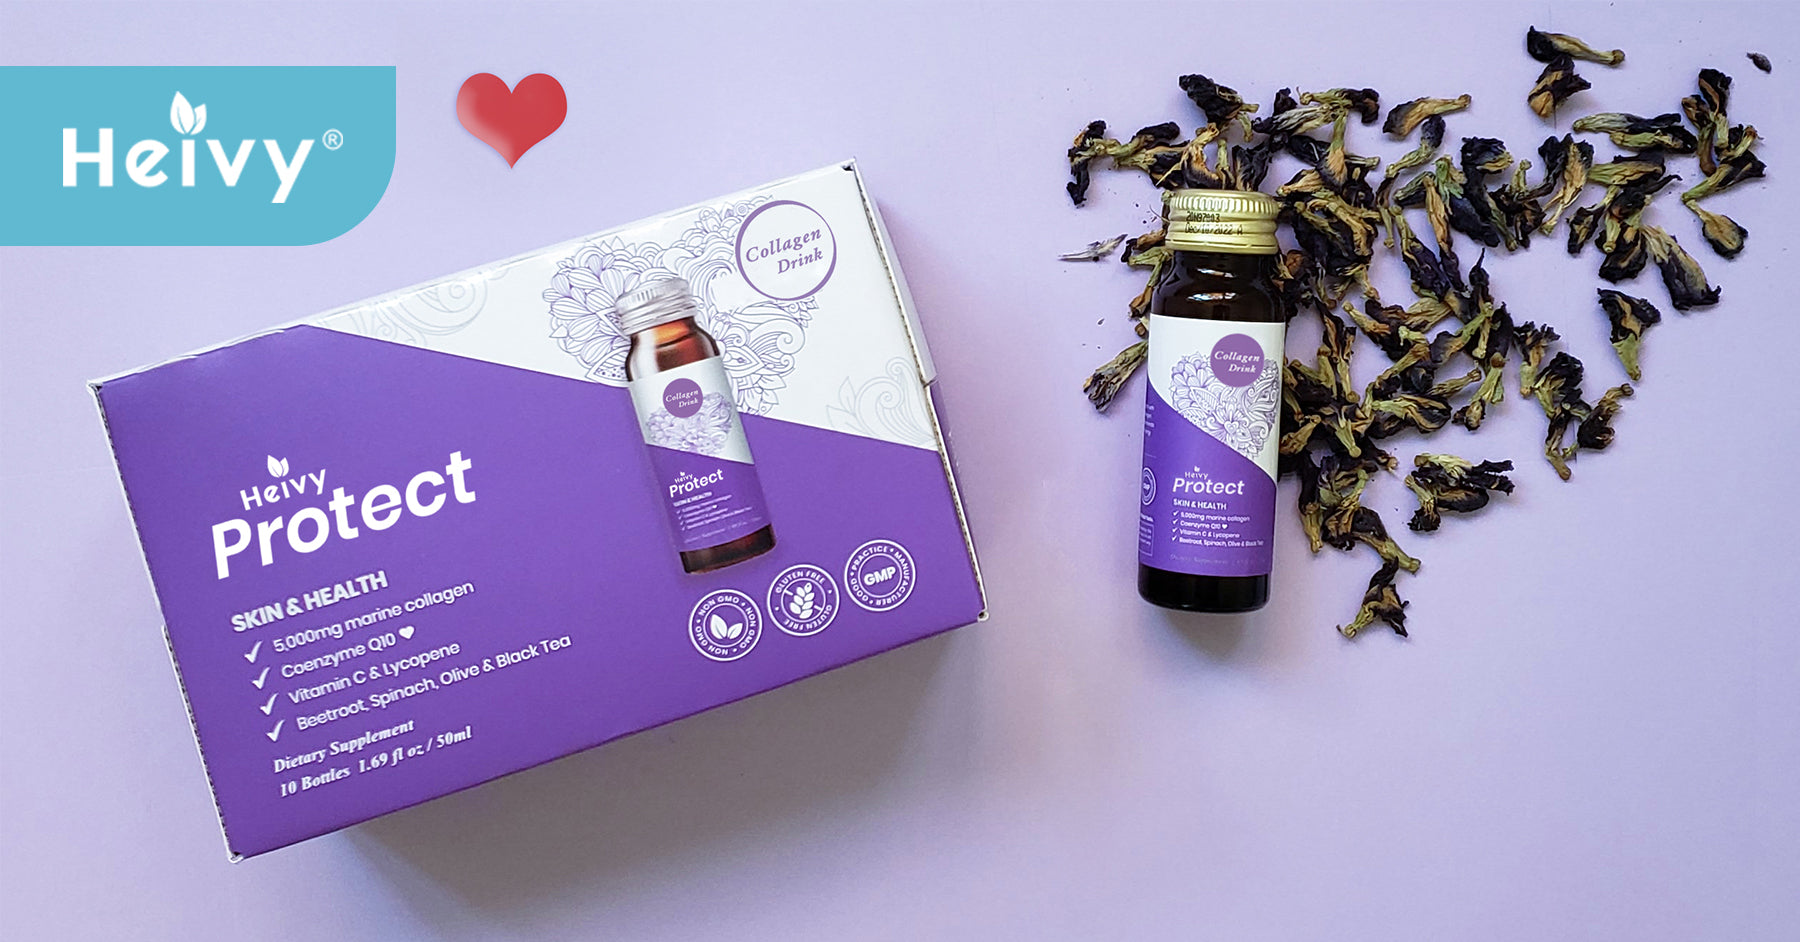 A Heartful Choice: Take A Closer Look at Type IV Collagen in Heivy Protect